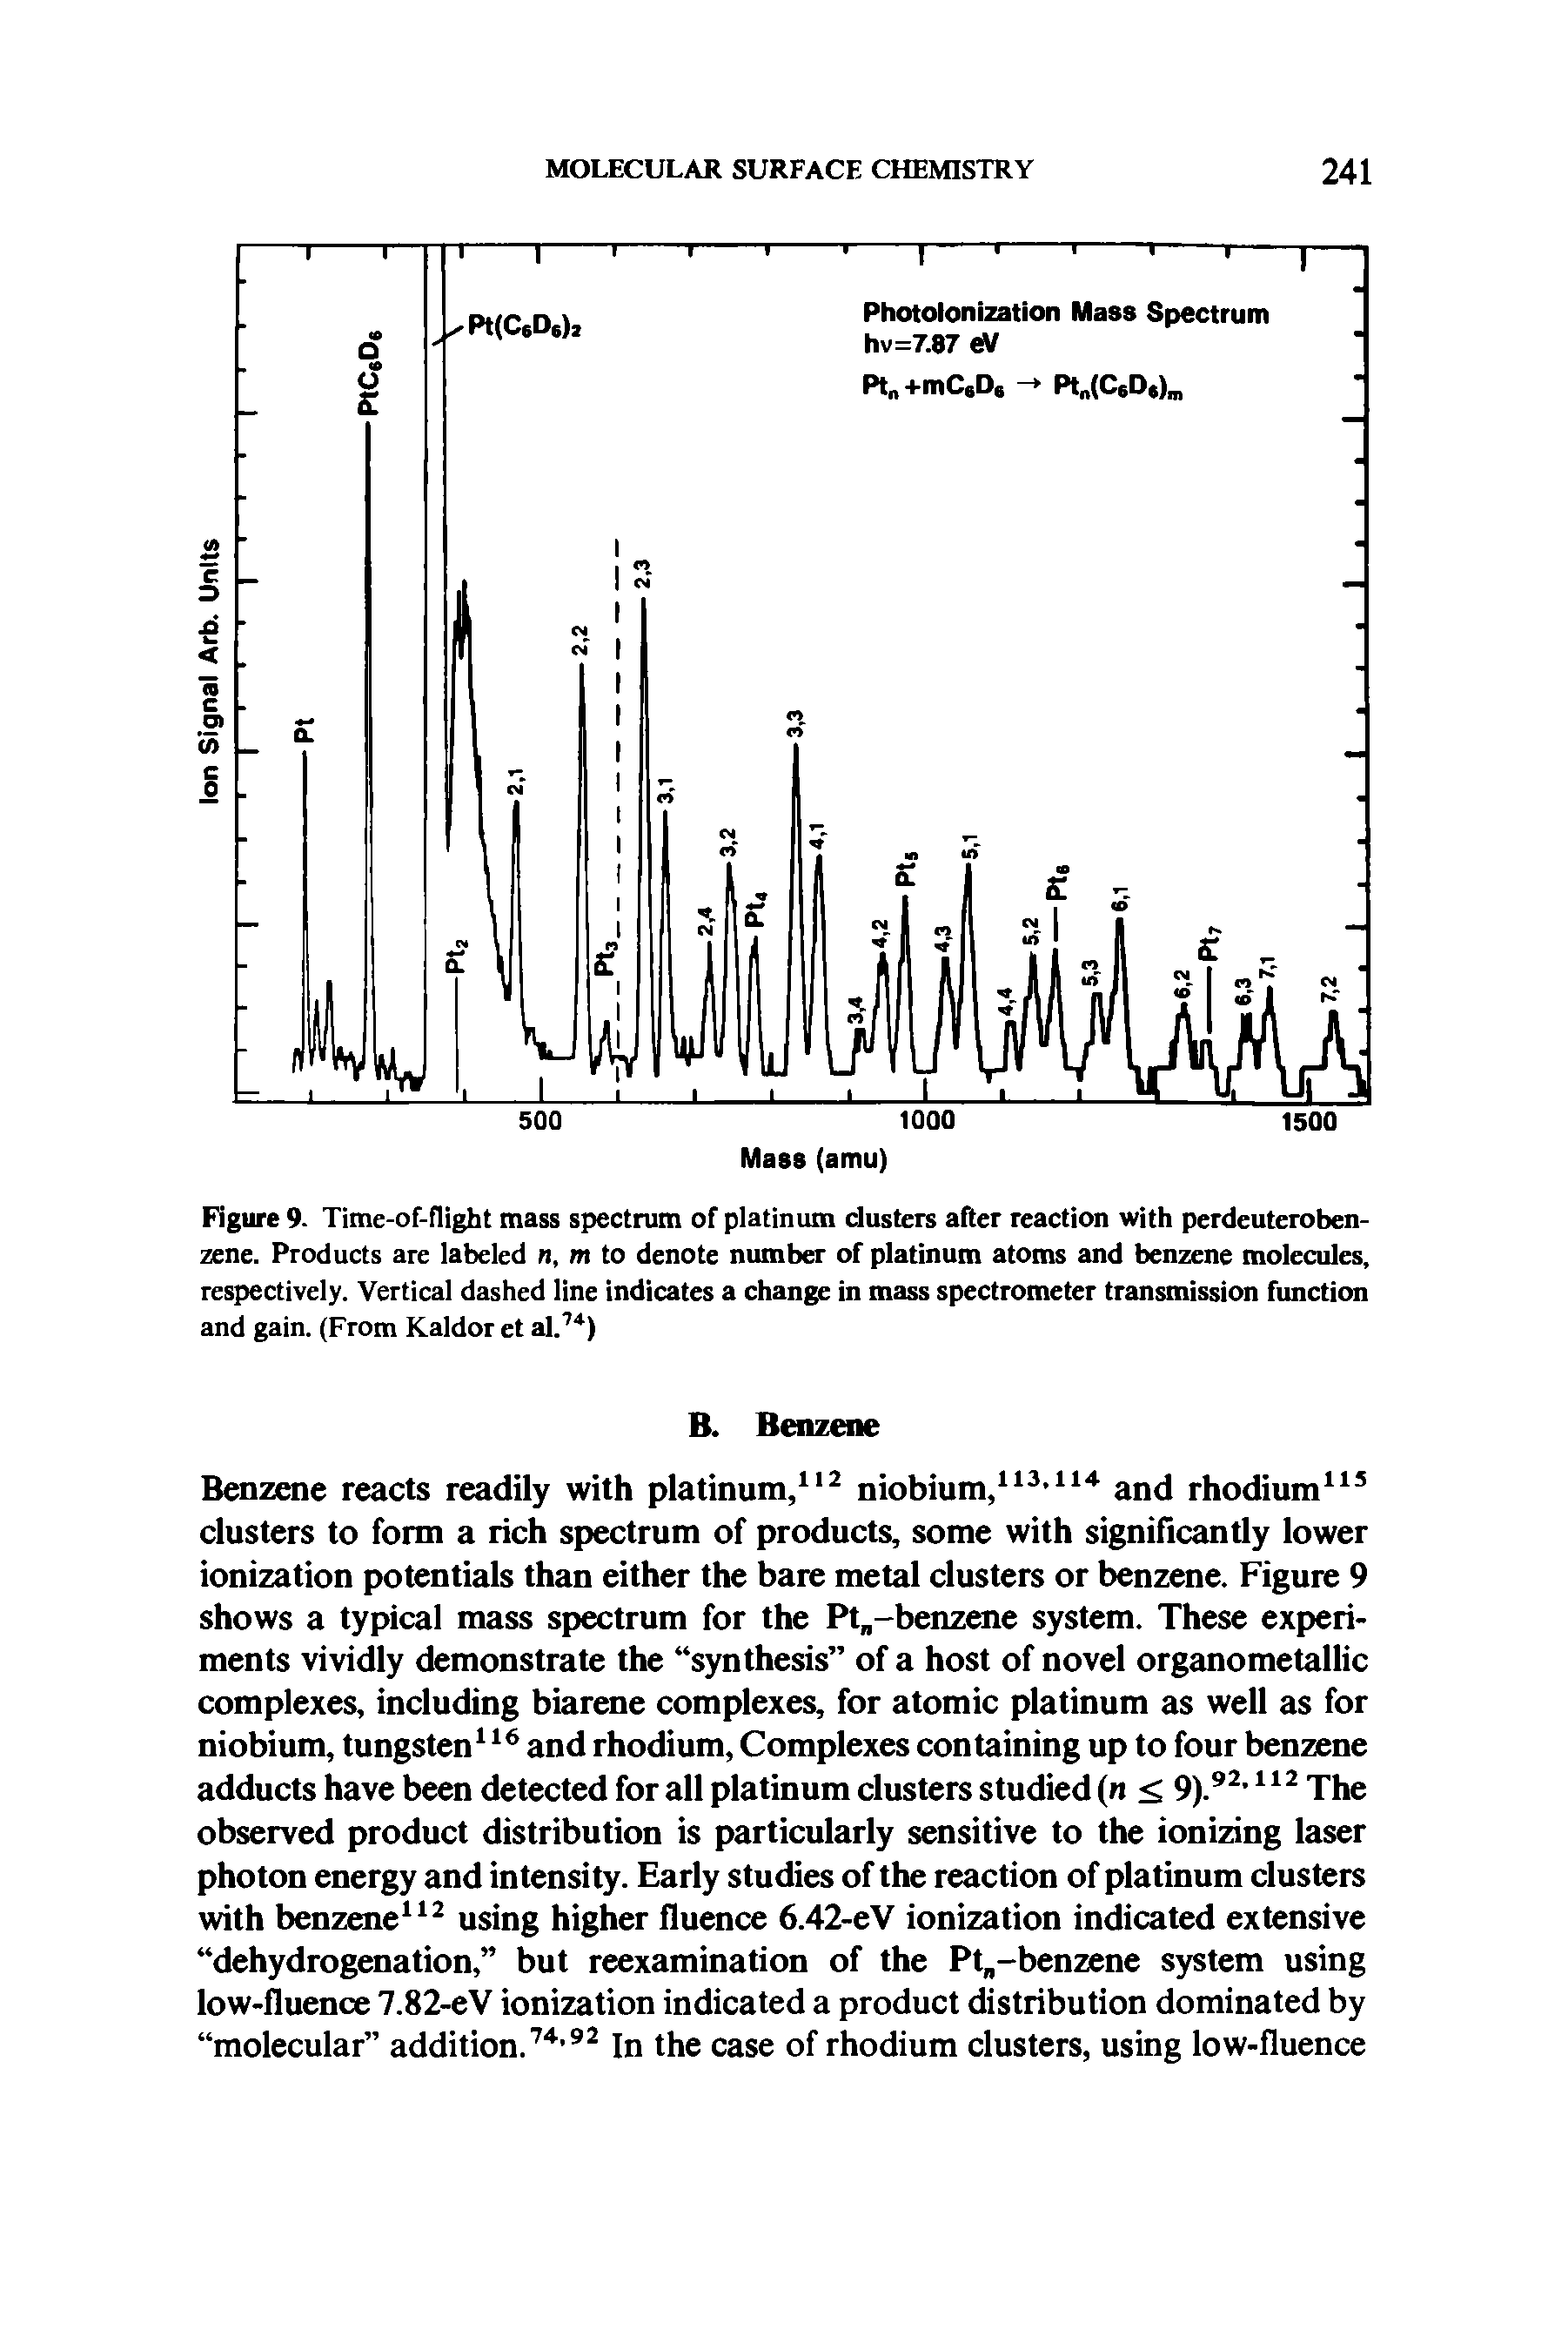 Figure 9. Time-of-flight mass spectrum of platinum clusters after reaction with perdeuteroben-zene. Products are labeled n, m to denote number of platinum atoms and benzene molecules, respectively. Vertical dashed line indicates a change in mass spectrometer transmission function and gain. (From Kaldor et al. )...